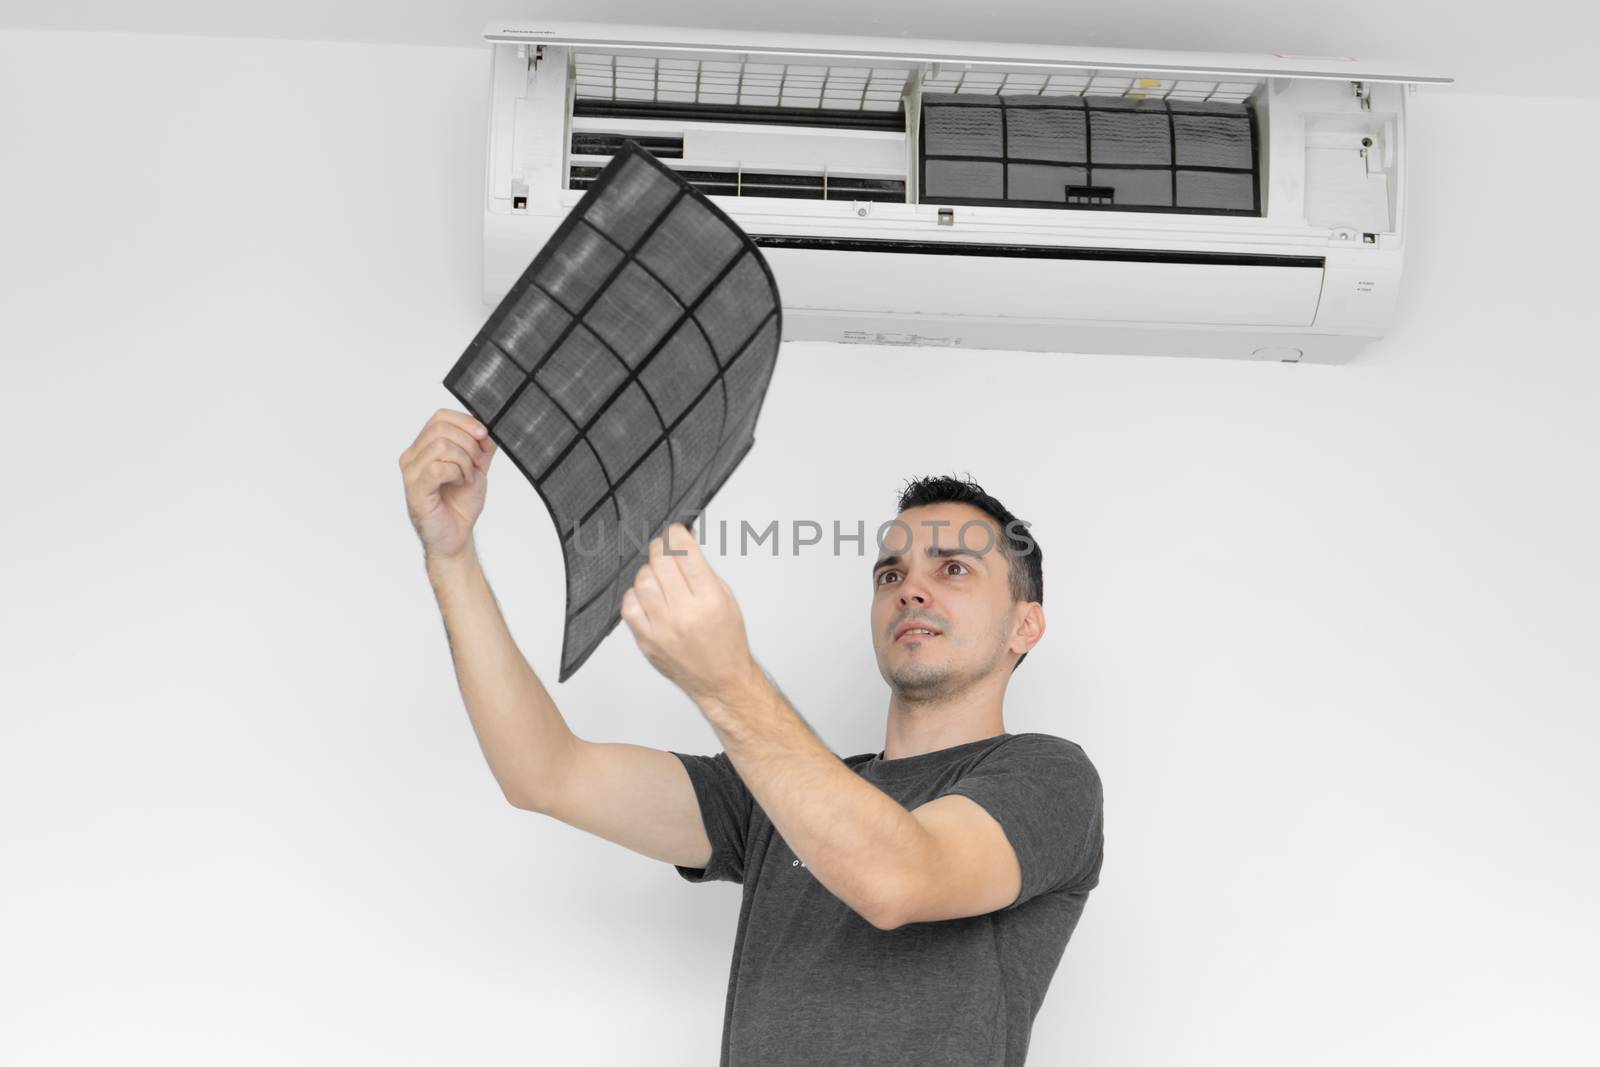 The guy cleans the filter of the home air conditioner from dust. The guy snayed a very dirty air conditioning filter. and examines it in his hands. Climate equipment care